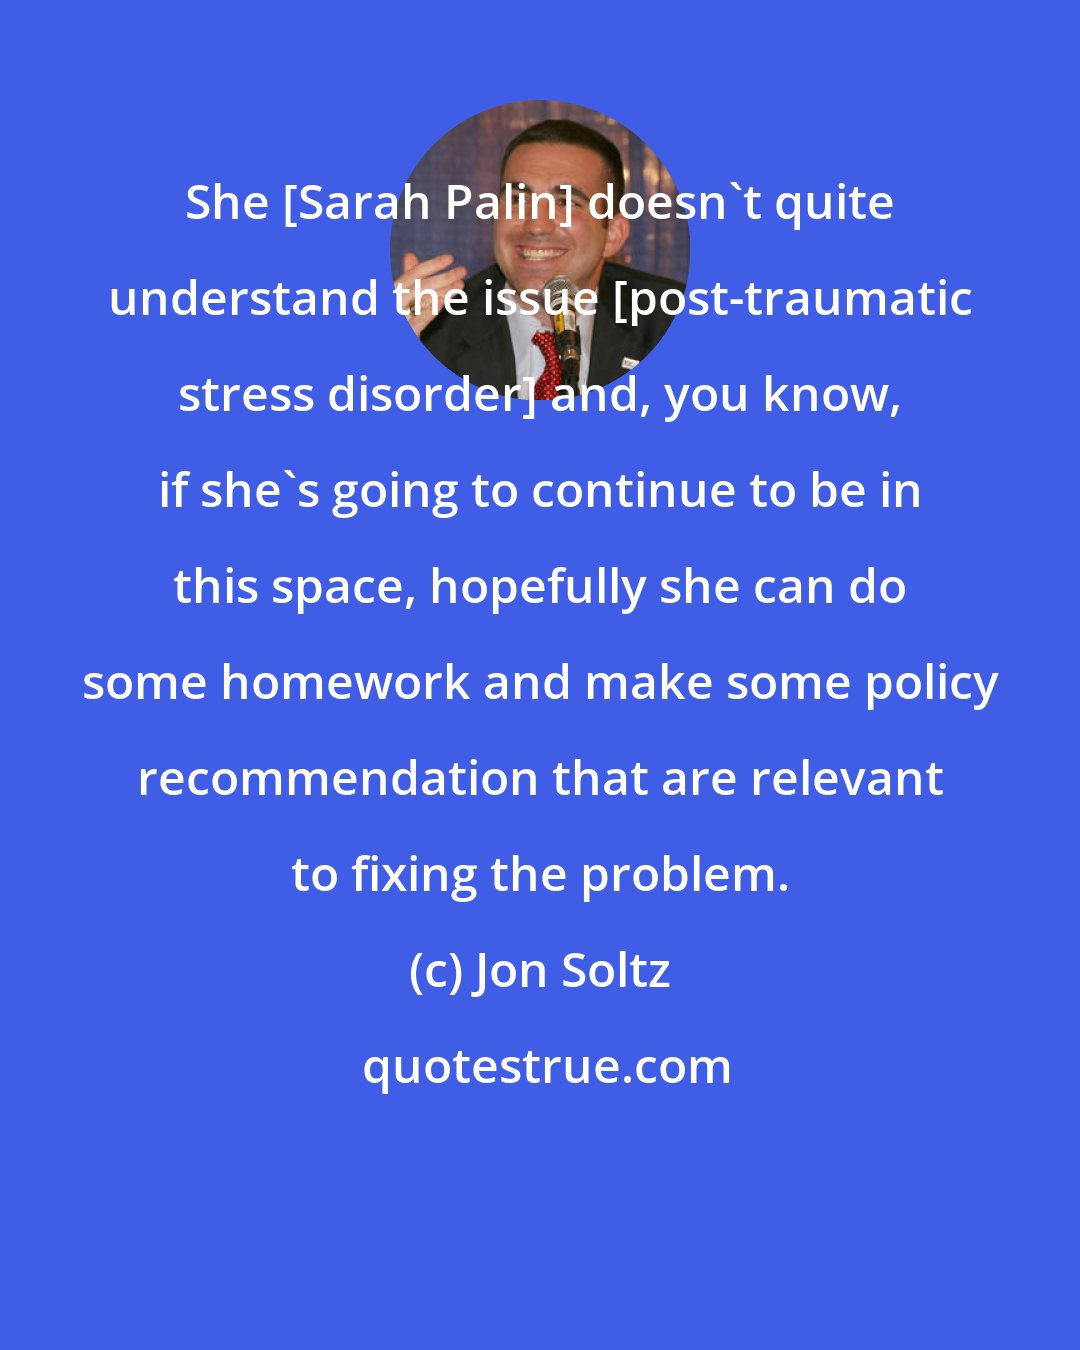 Jon Soltz: She [Sarah Palin] doesn`t quite understand the issue [post-traumatic stress disorder] and, you know, if she`s going to continue to be in this space, hopefully she can do some homework and make some policy recommendation that are relevant to fixing the problem.